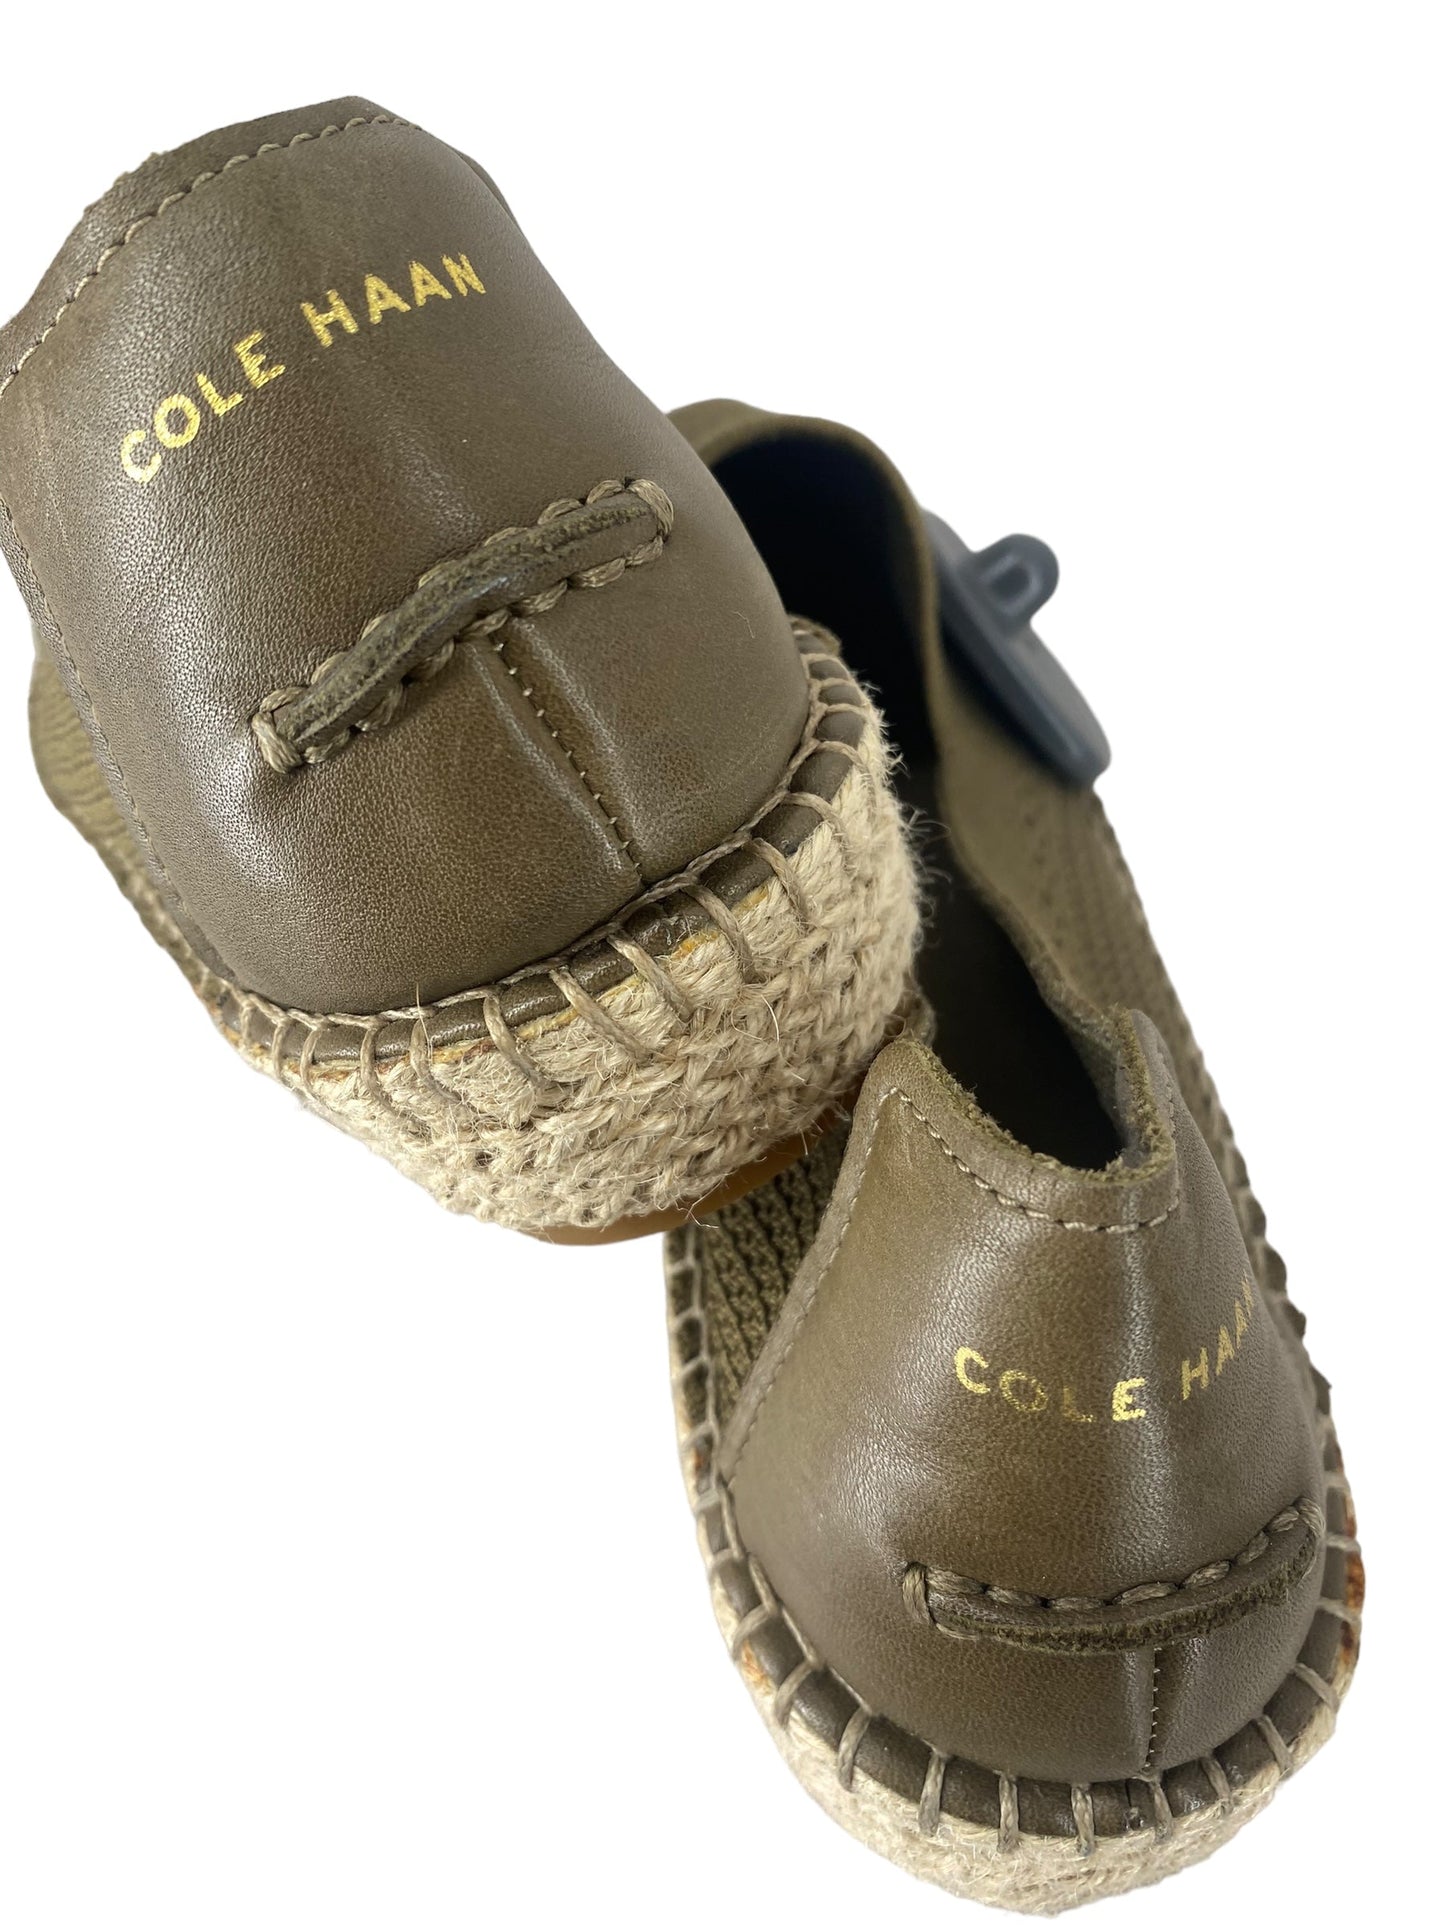 Green Shoes Flats Cole-haan, Size 8.5